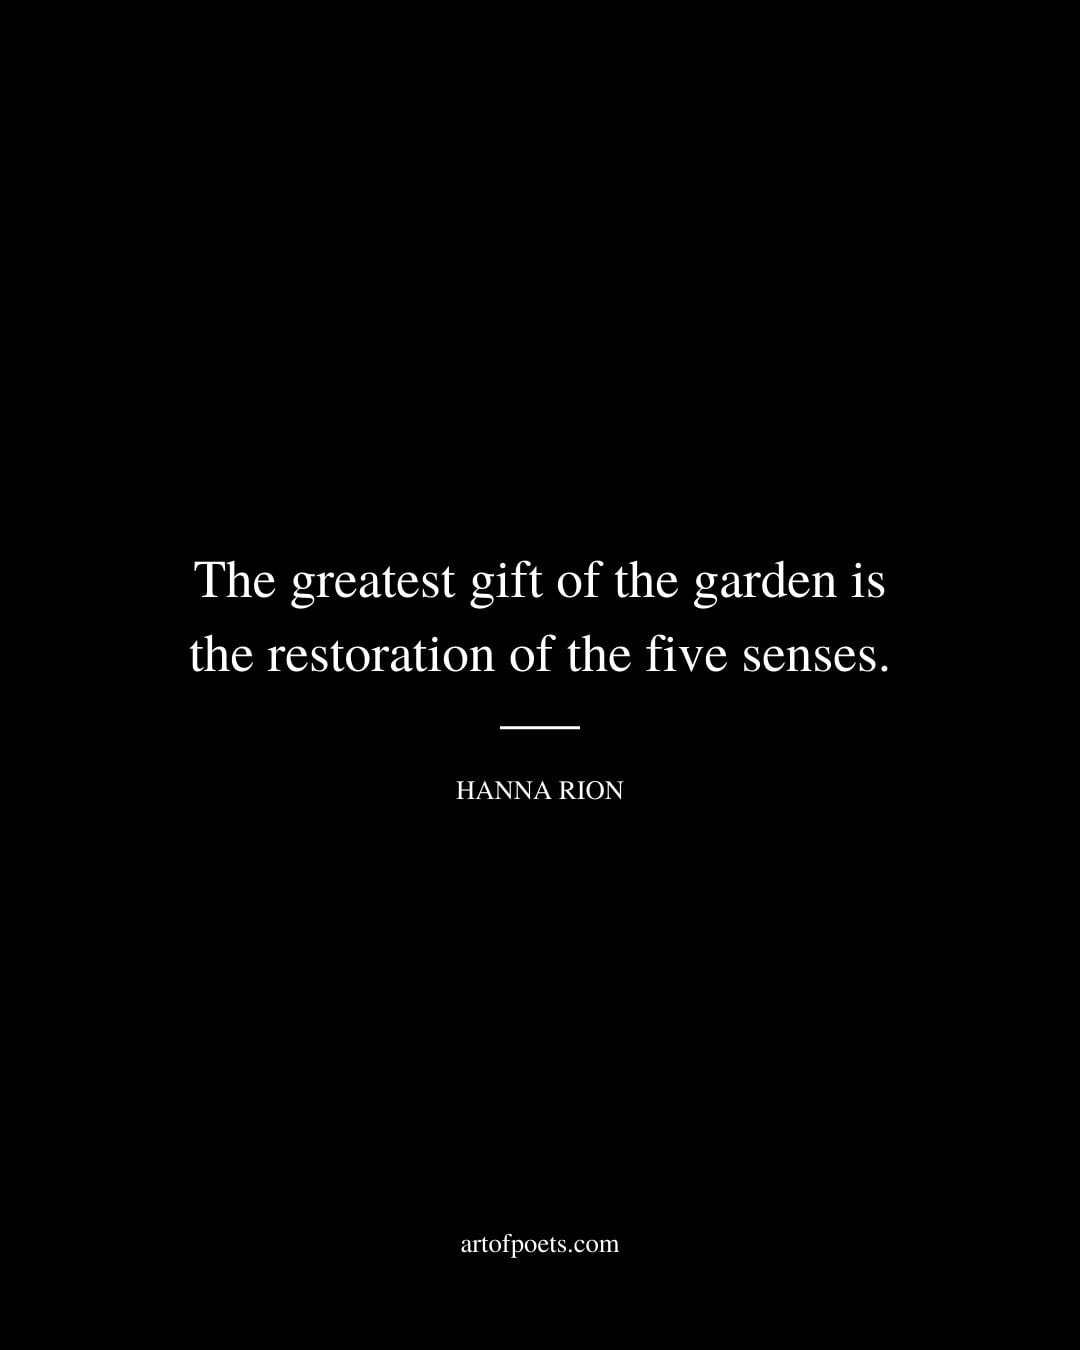 The greatest gift of the garden is the restoration of the five senses. Hanna Rion